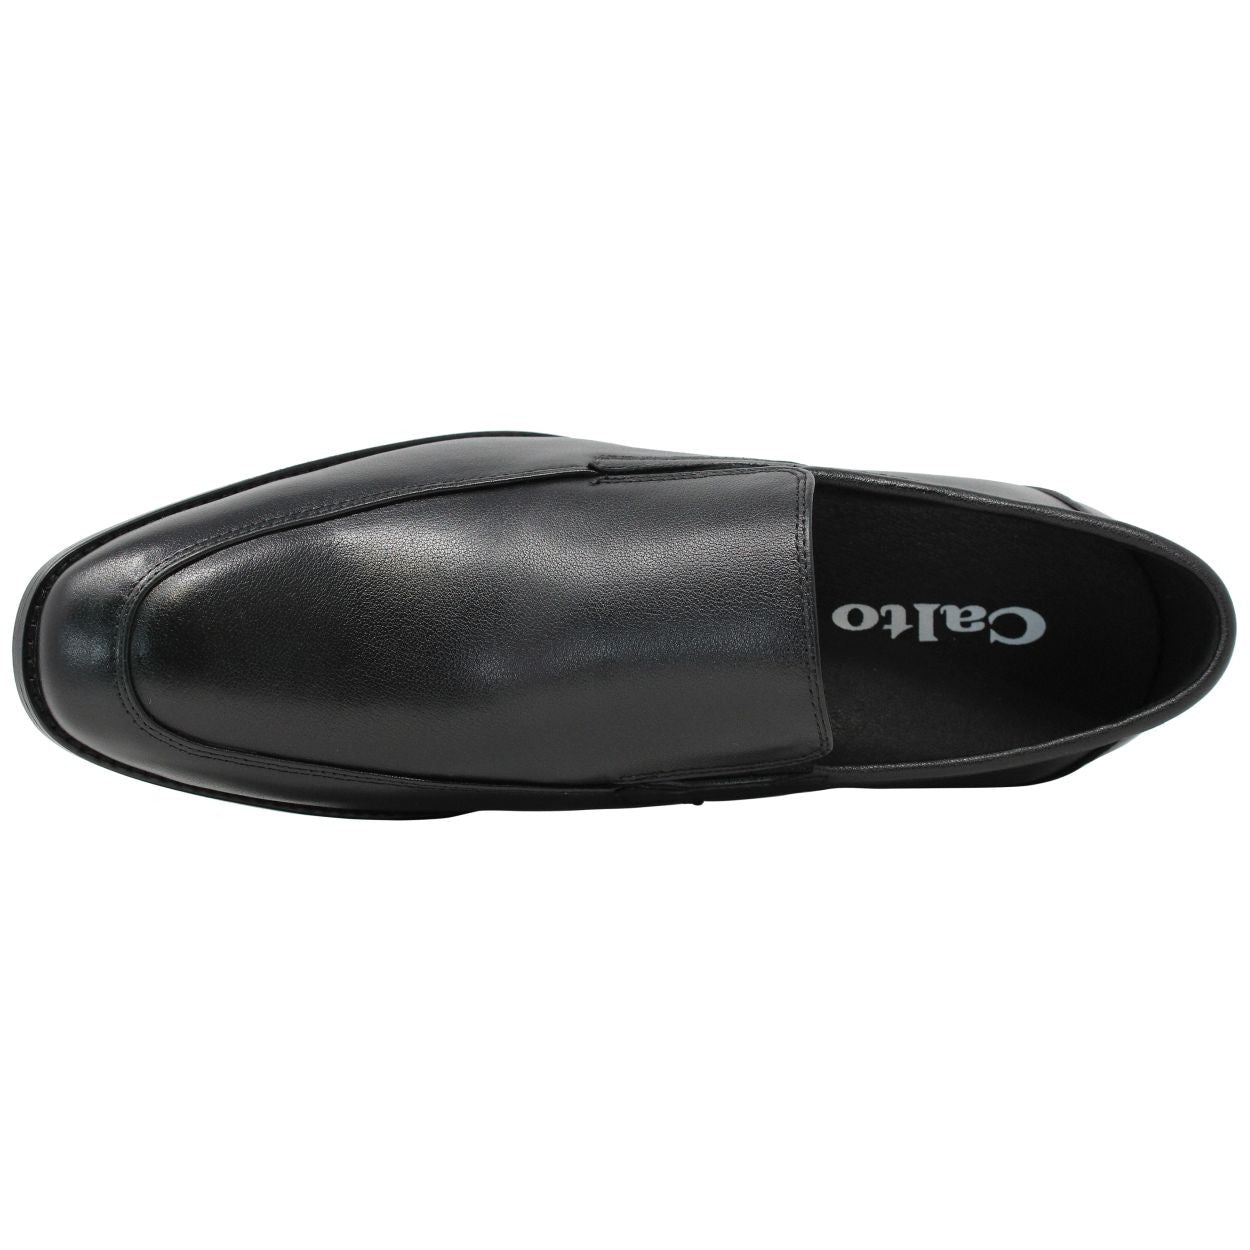 Elevator shoes height increase CALTO - Y40112 - 3.2 Inches Taller (Black)